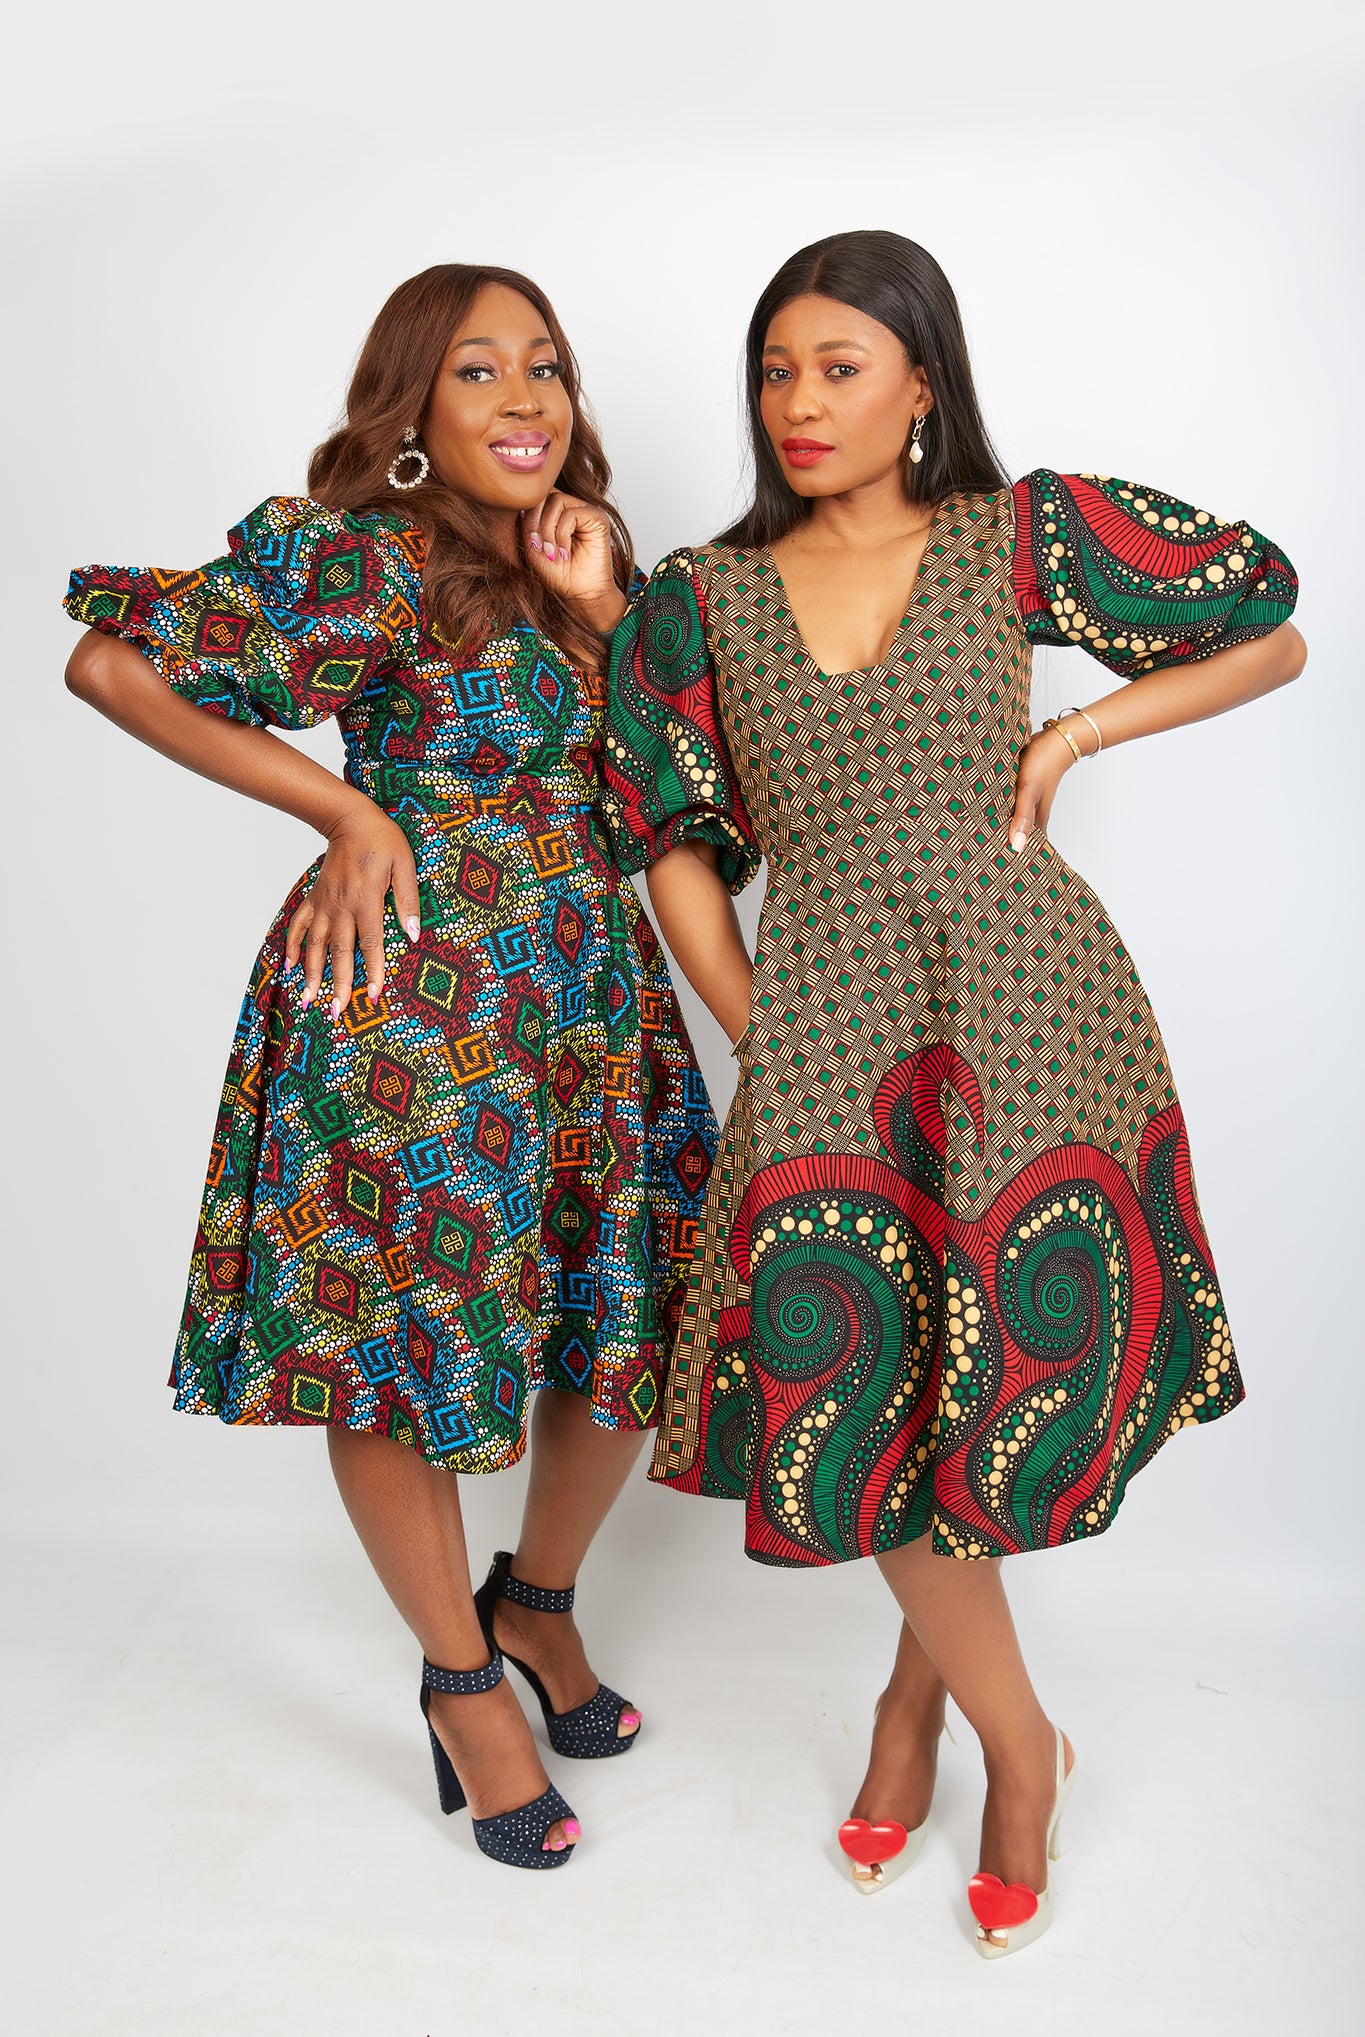 Shop African dresses, African dress for plus size women | African print clothing in the UK | Ready to wear African print outfits | African dress styles | African clothing | african outfit | kitenge dresses | Africa Dresses for Women | Ankara Styles for ladies | African dresses for work | Danshiki Dress | Ghana African dress | Kente Dress | African dress | African print Dress | African Clothing Online Shop | Short African dress | Mini African dress UK | African dress UK